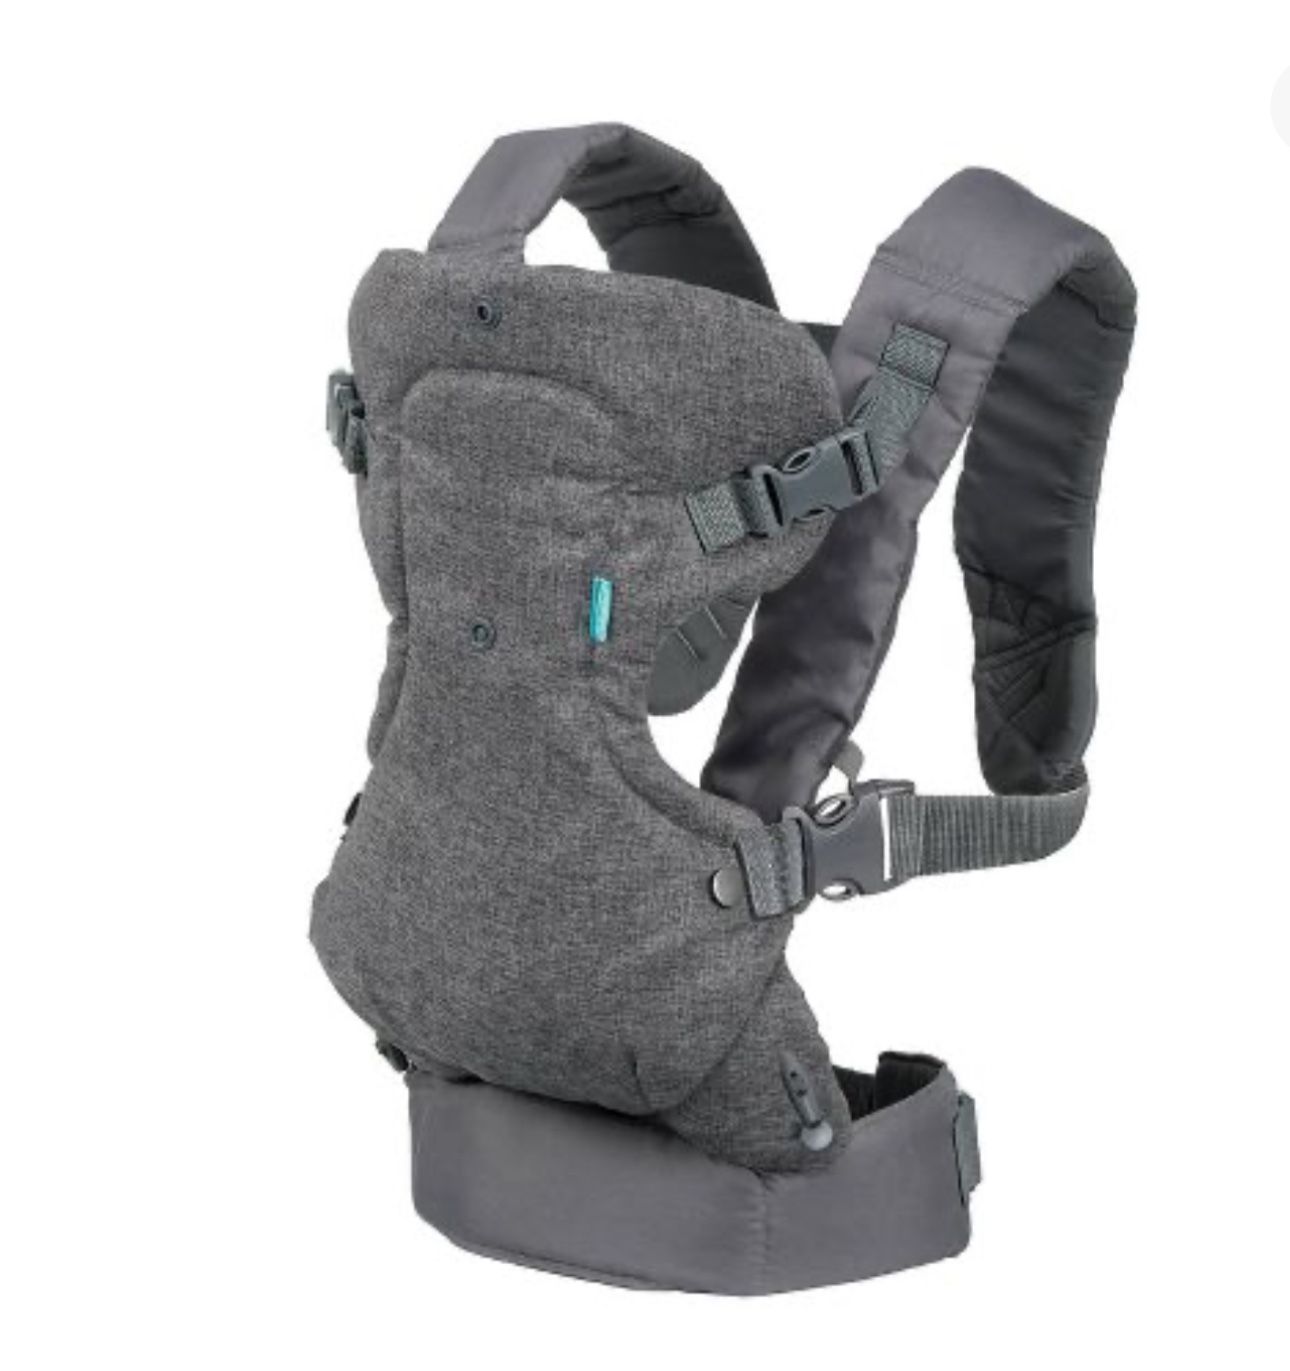 Convertible Baby Carrier